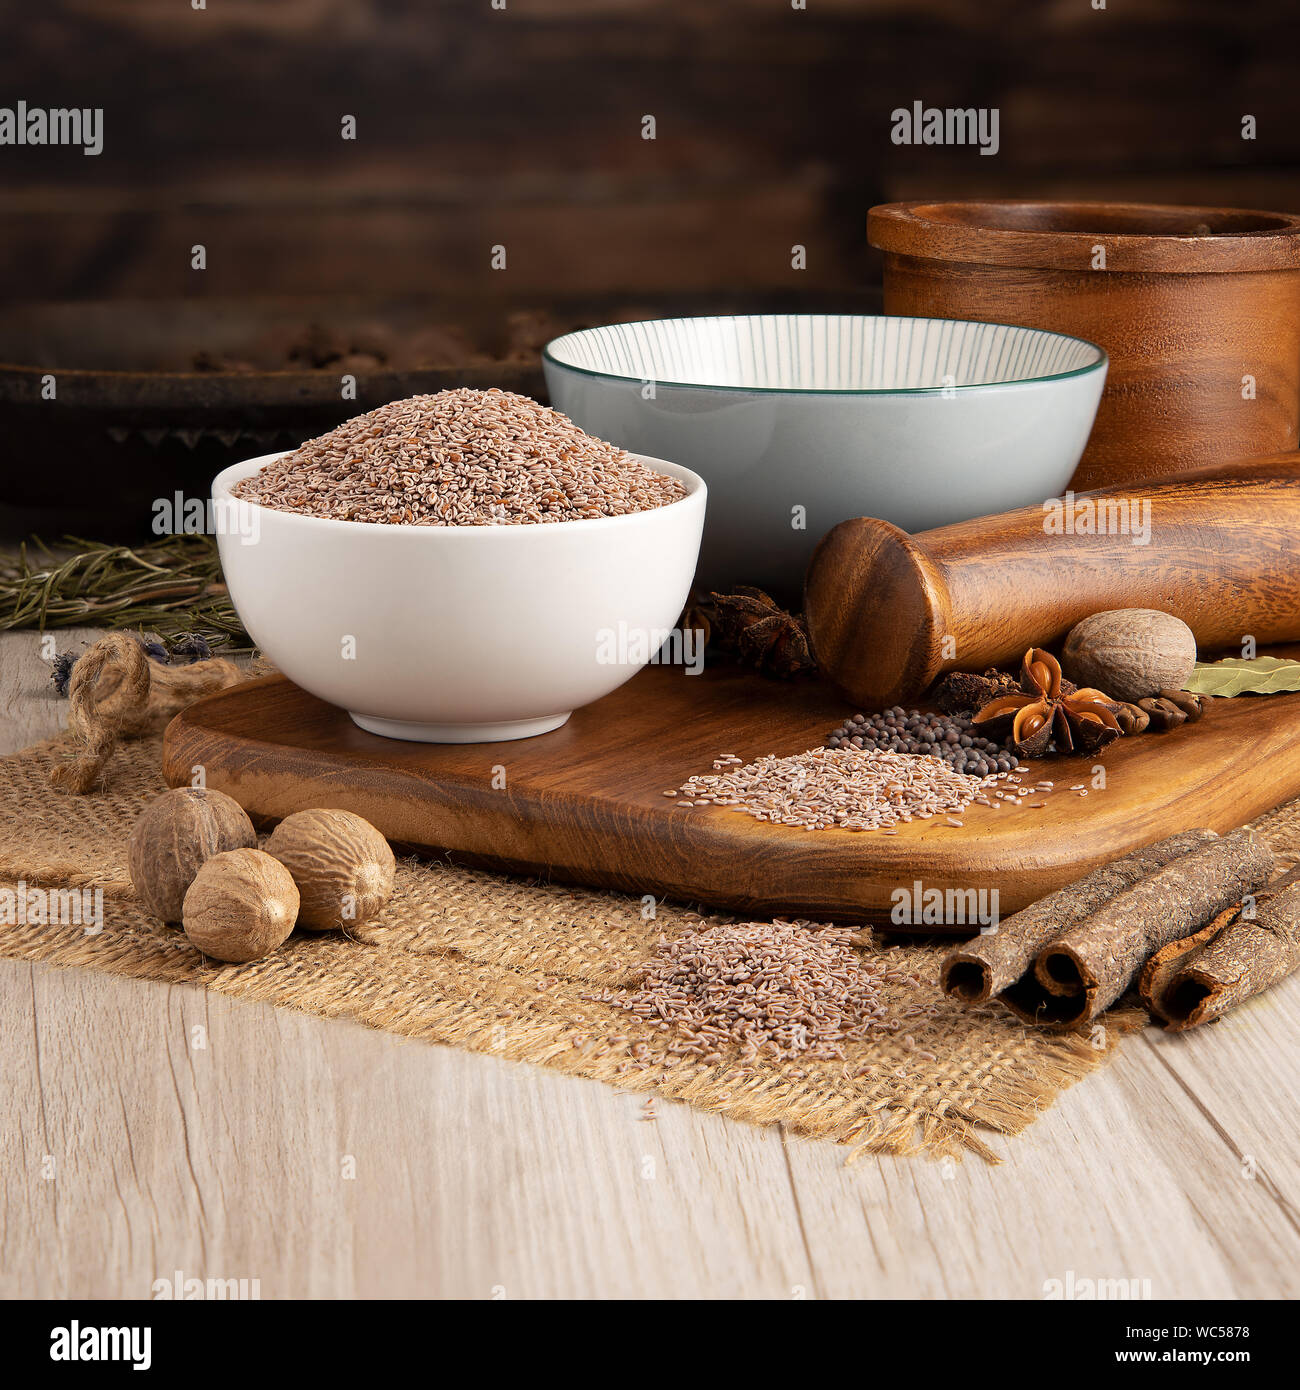 Psyllium Seeds in a bowl and food preparation and kitchen setting Stock Photo